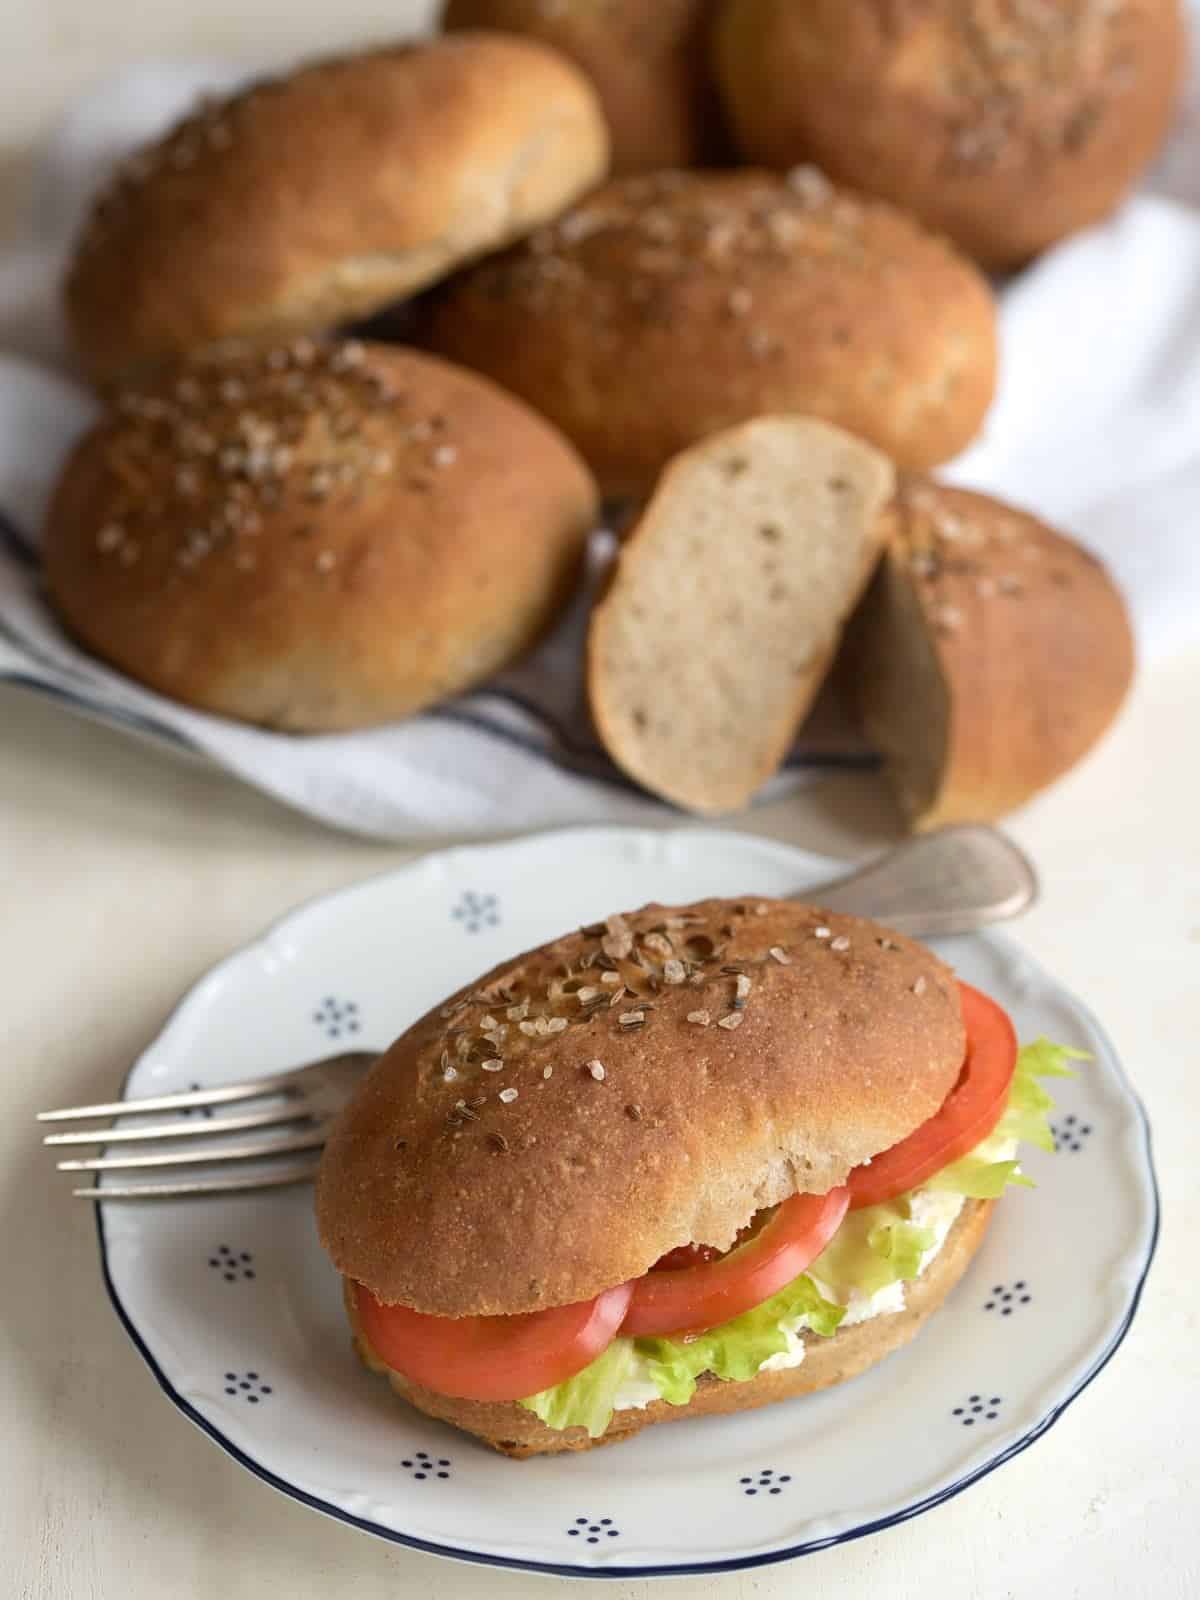 Sandwich made from a rye roll.